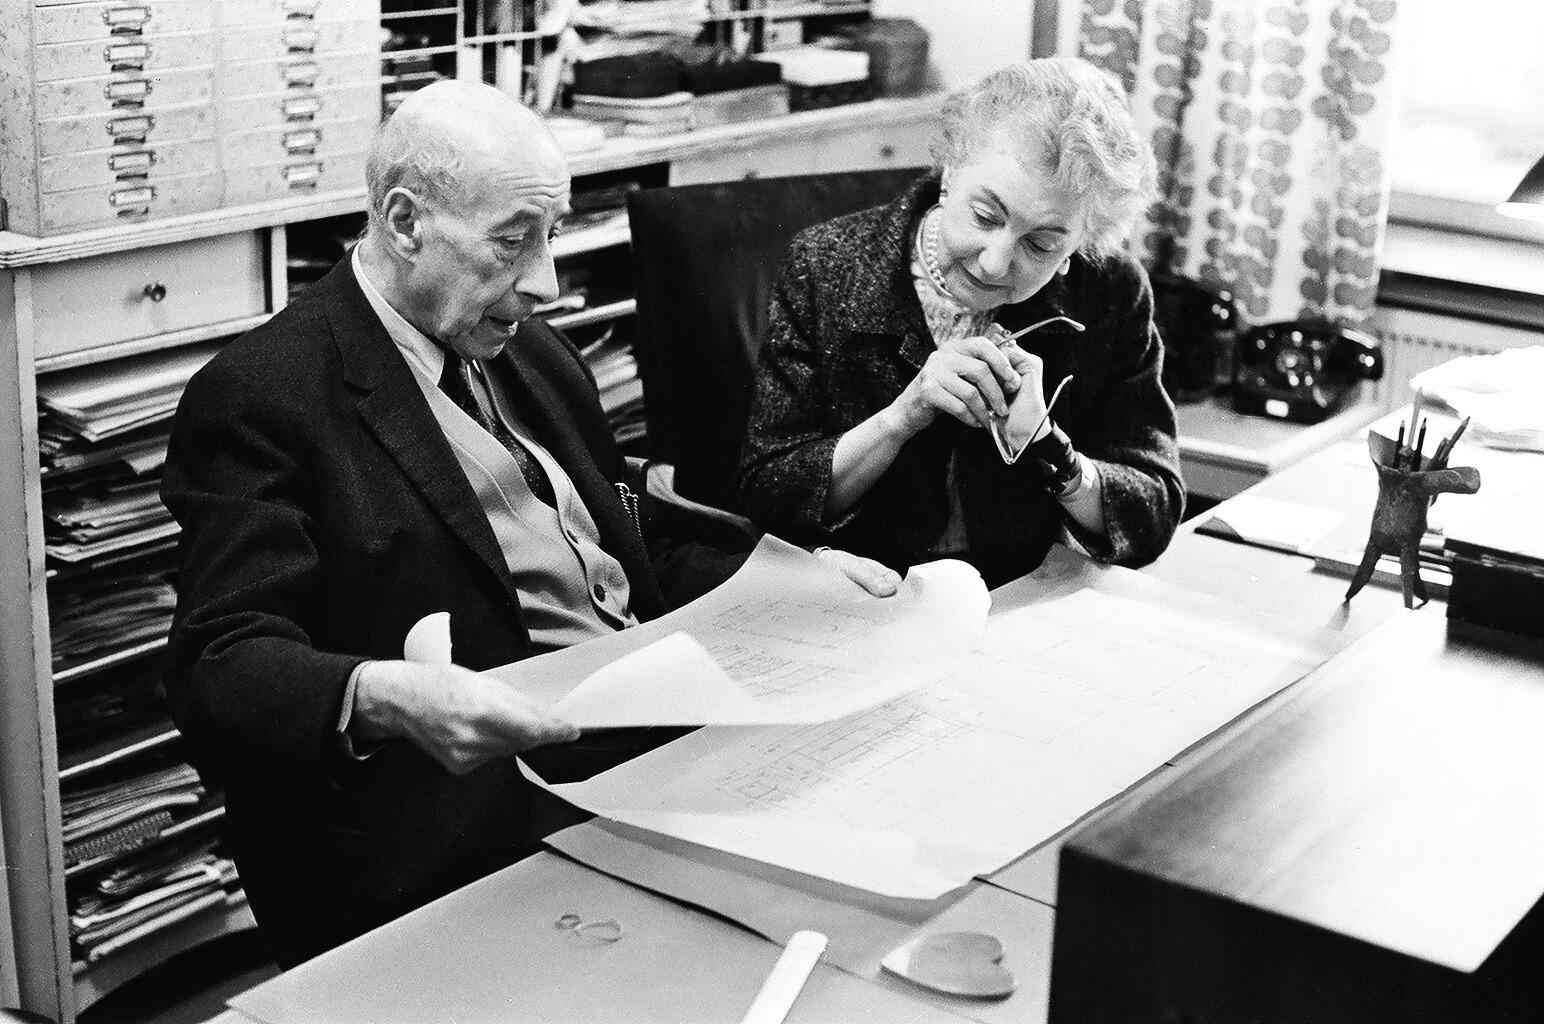 An older man and woman sitting at a desk looking at design drawings.